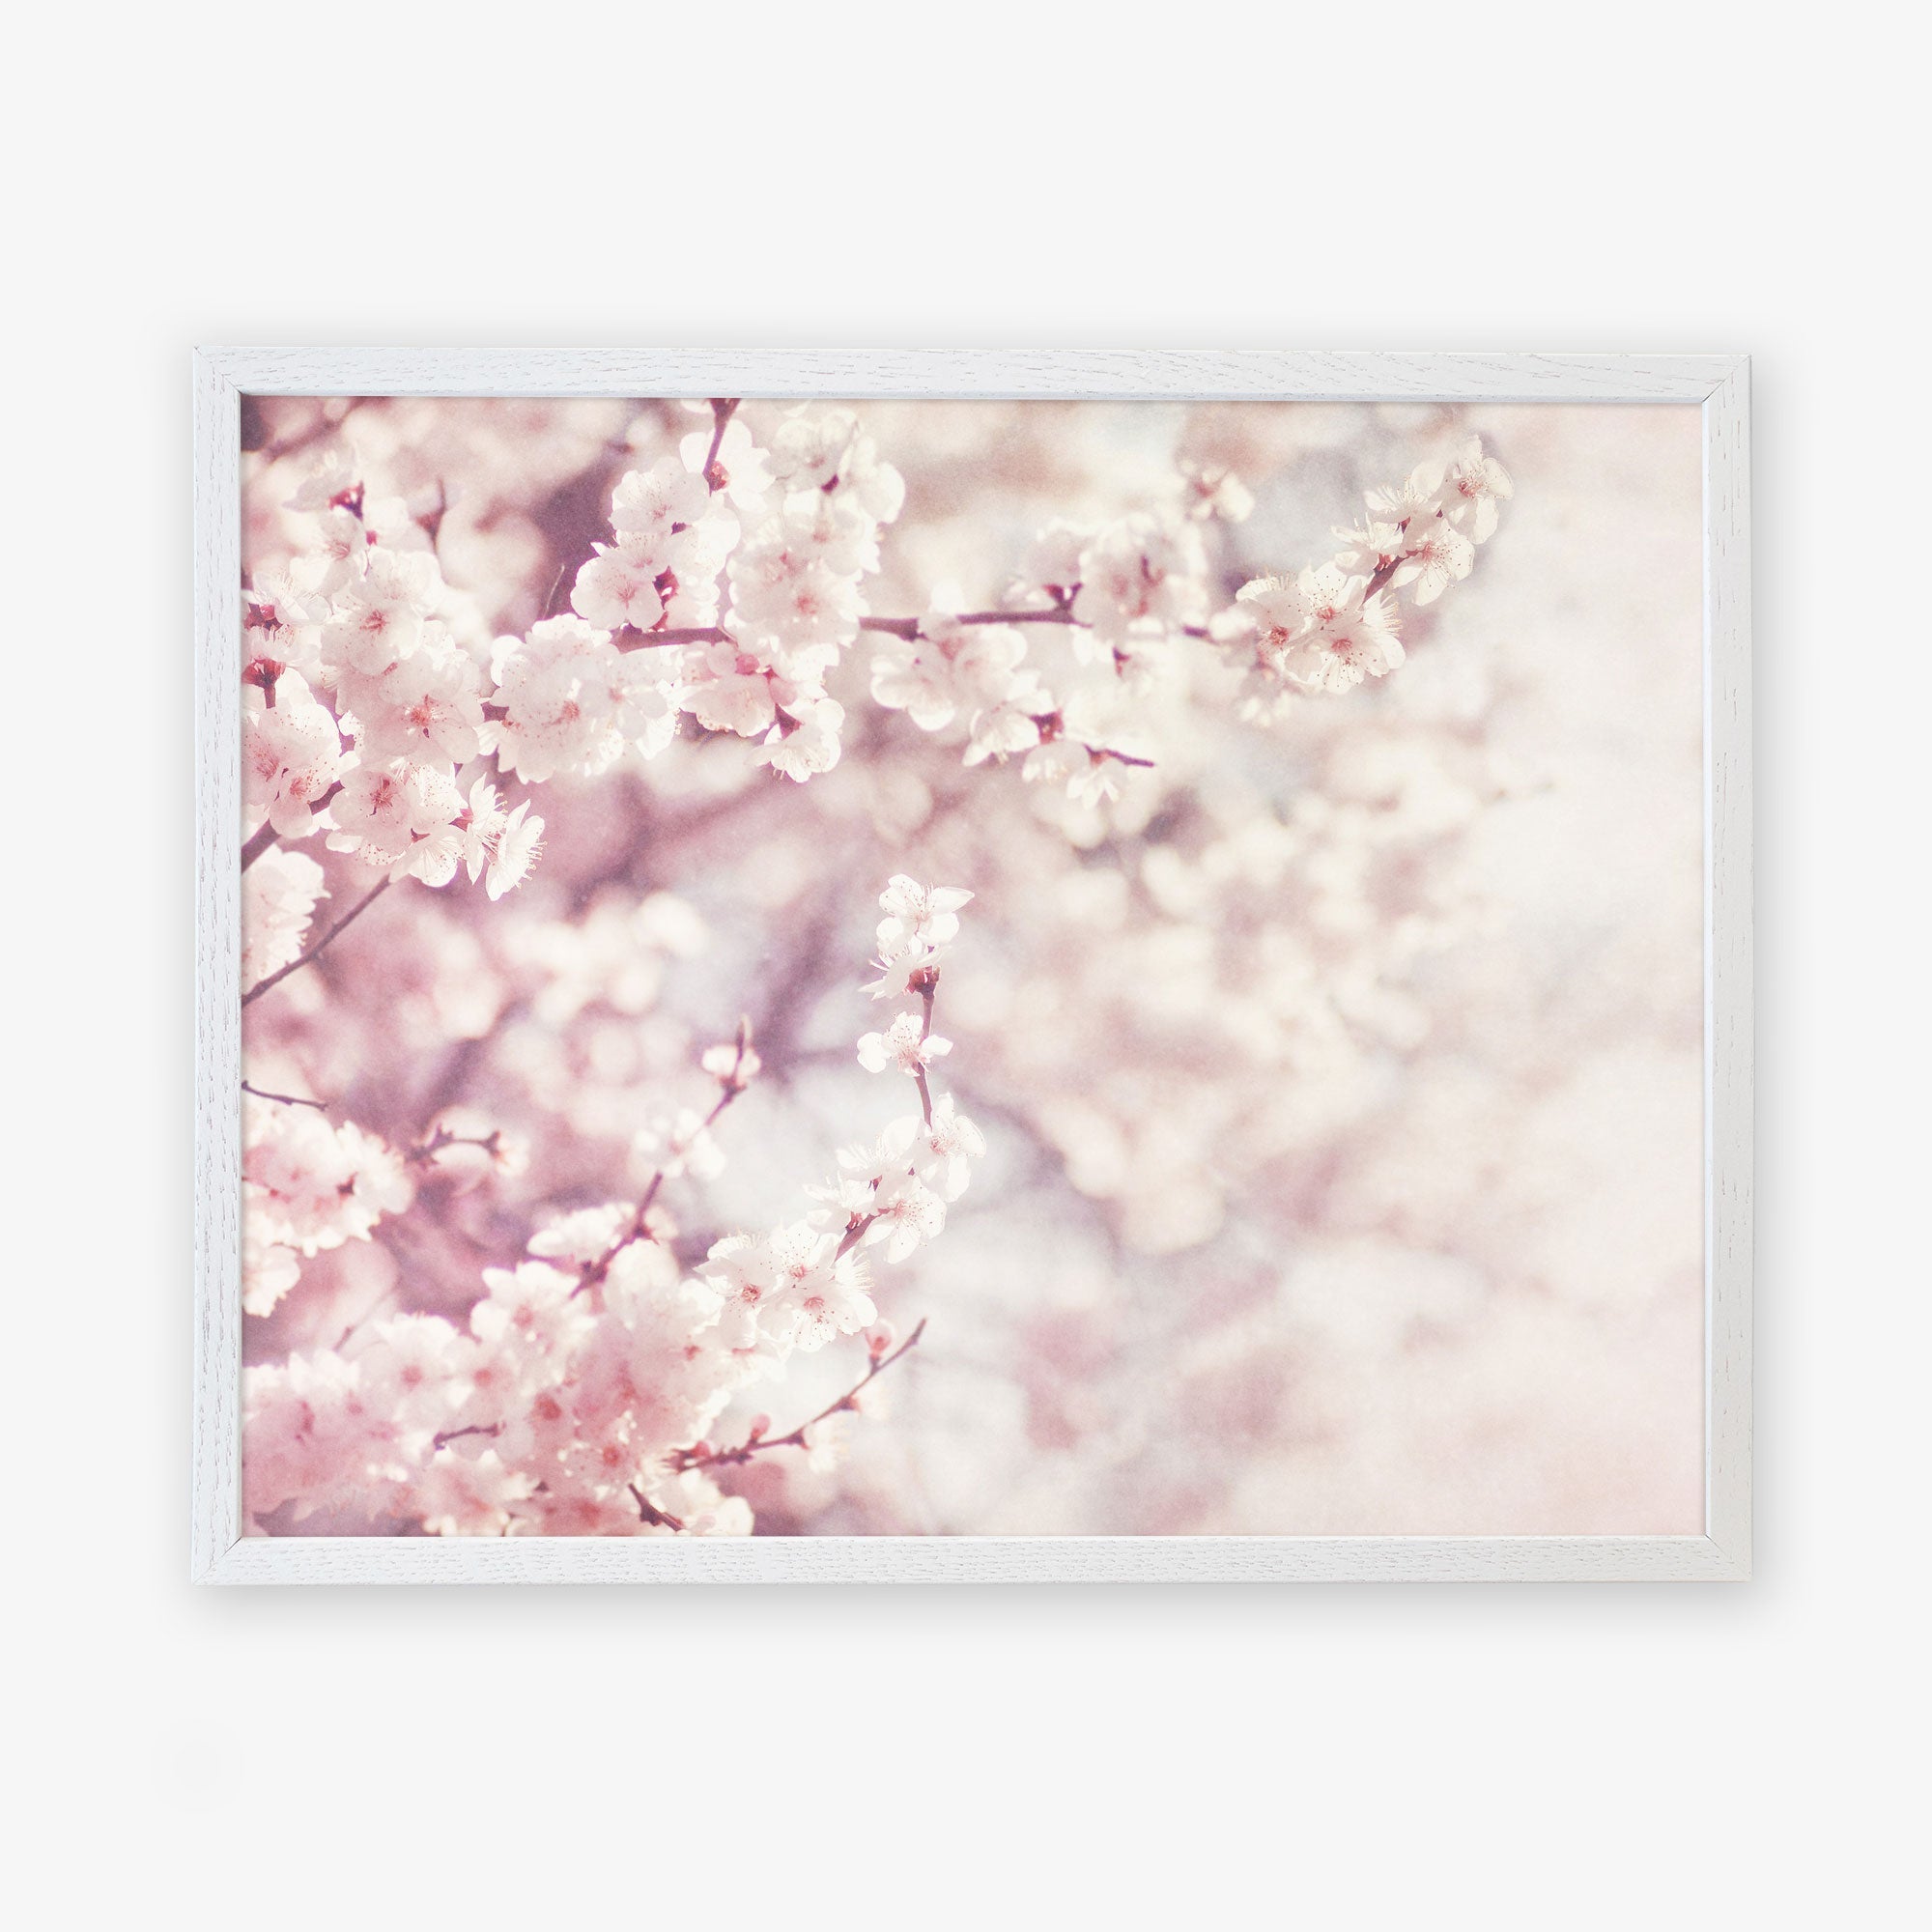 A framed image of delicate cherry blossoms in shabby pink tones, capturing a dreamy and ethereal springtime scene - Offley Green&#39;s Pink Floral Print, &#39;Dreamy Blossom&#39;.